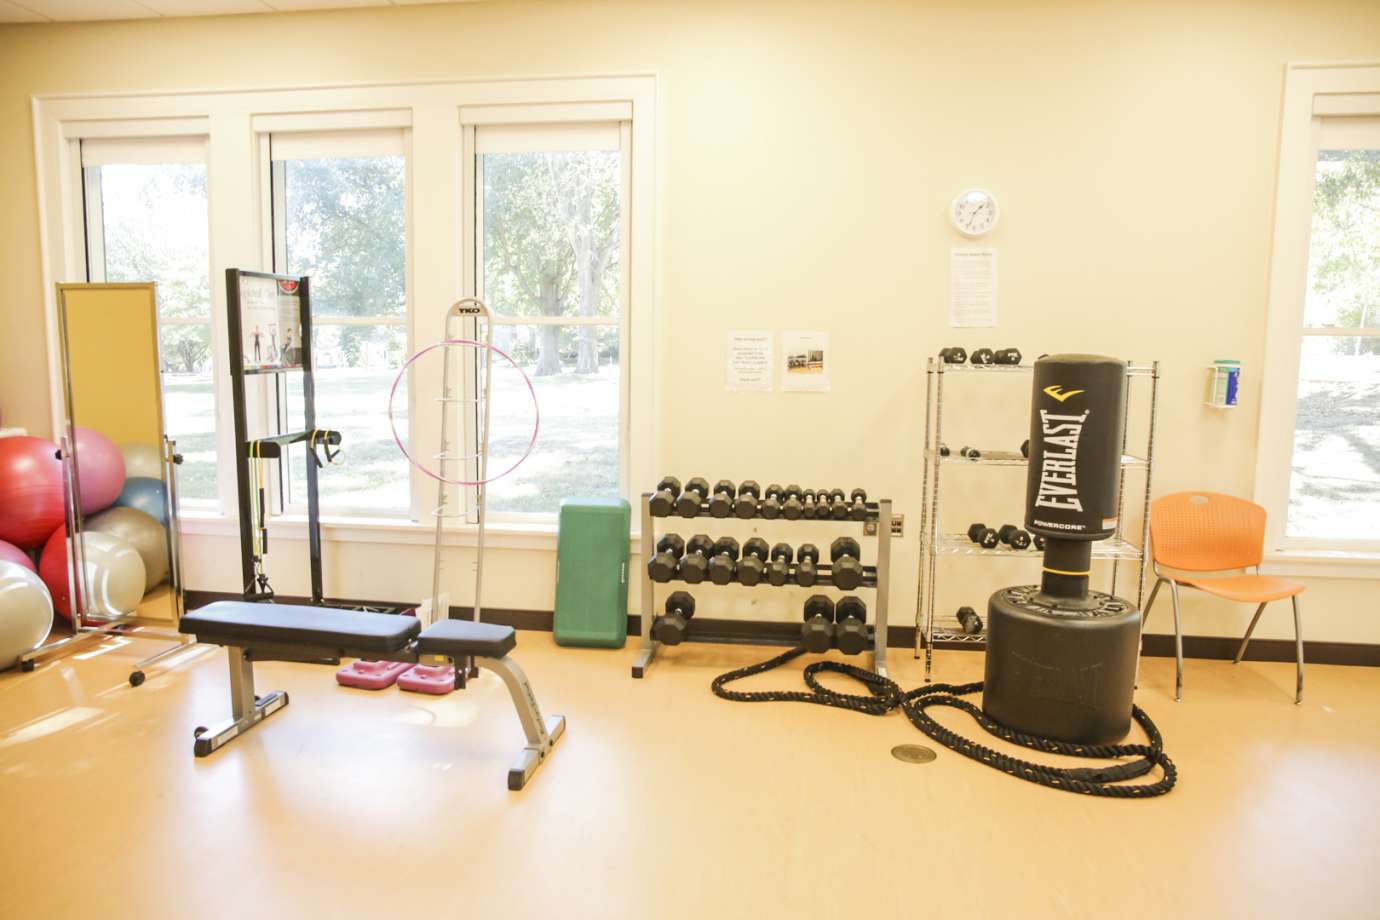 A fitness room with a punching bag, weights and cardio equipment 